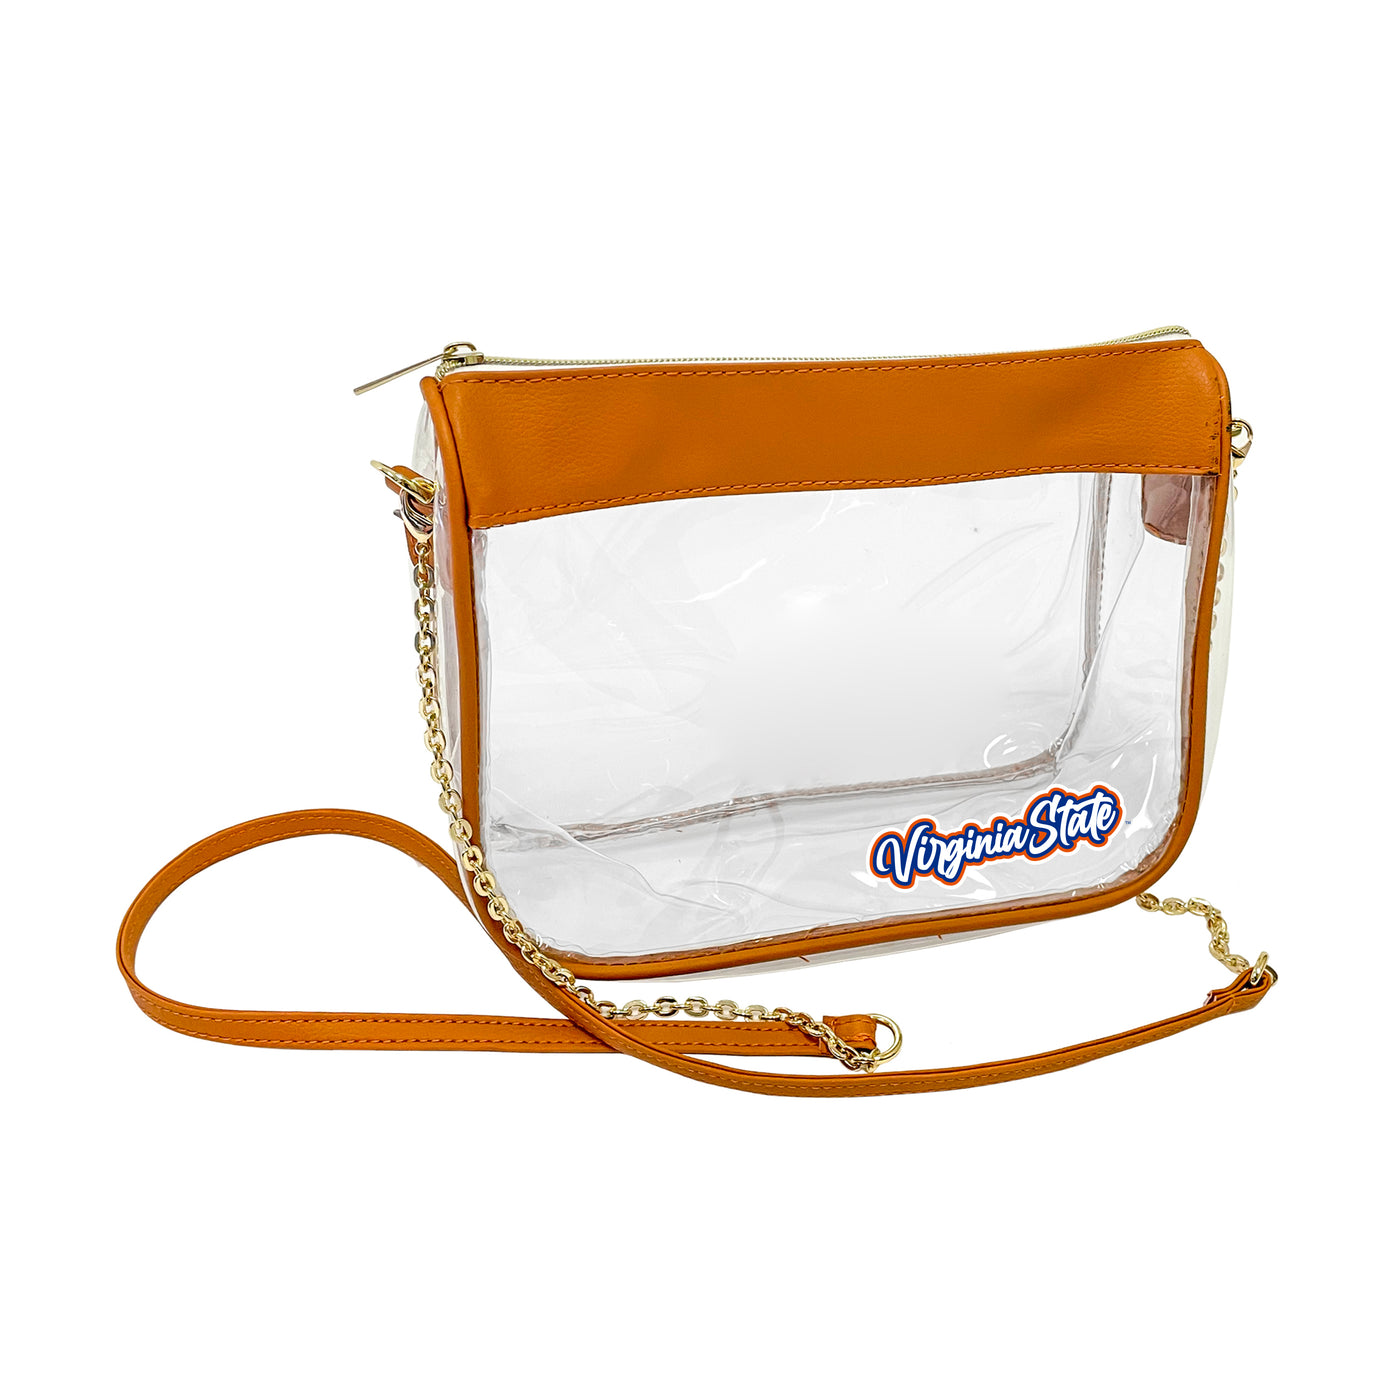 Virginia State Hype Clear Bag